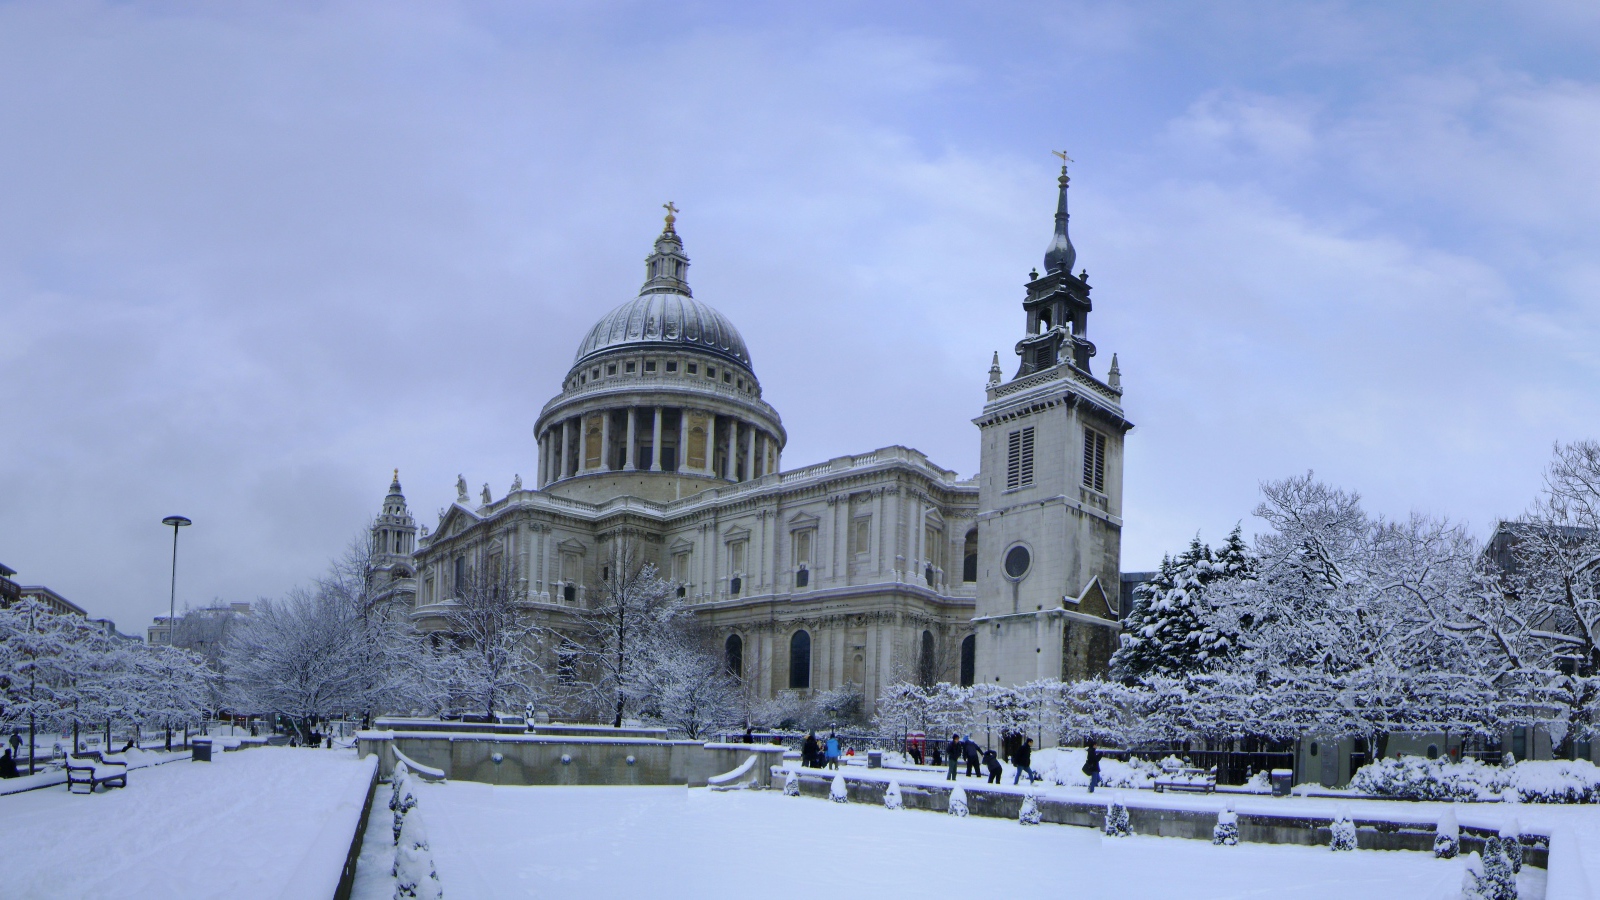 St. Paul's Cathedral in London in winter, England